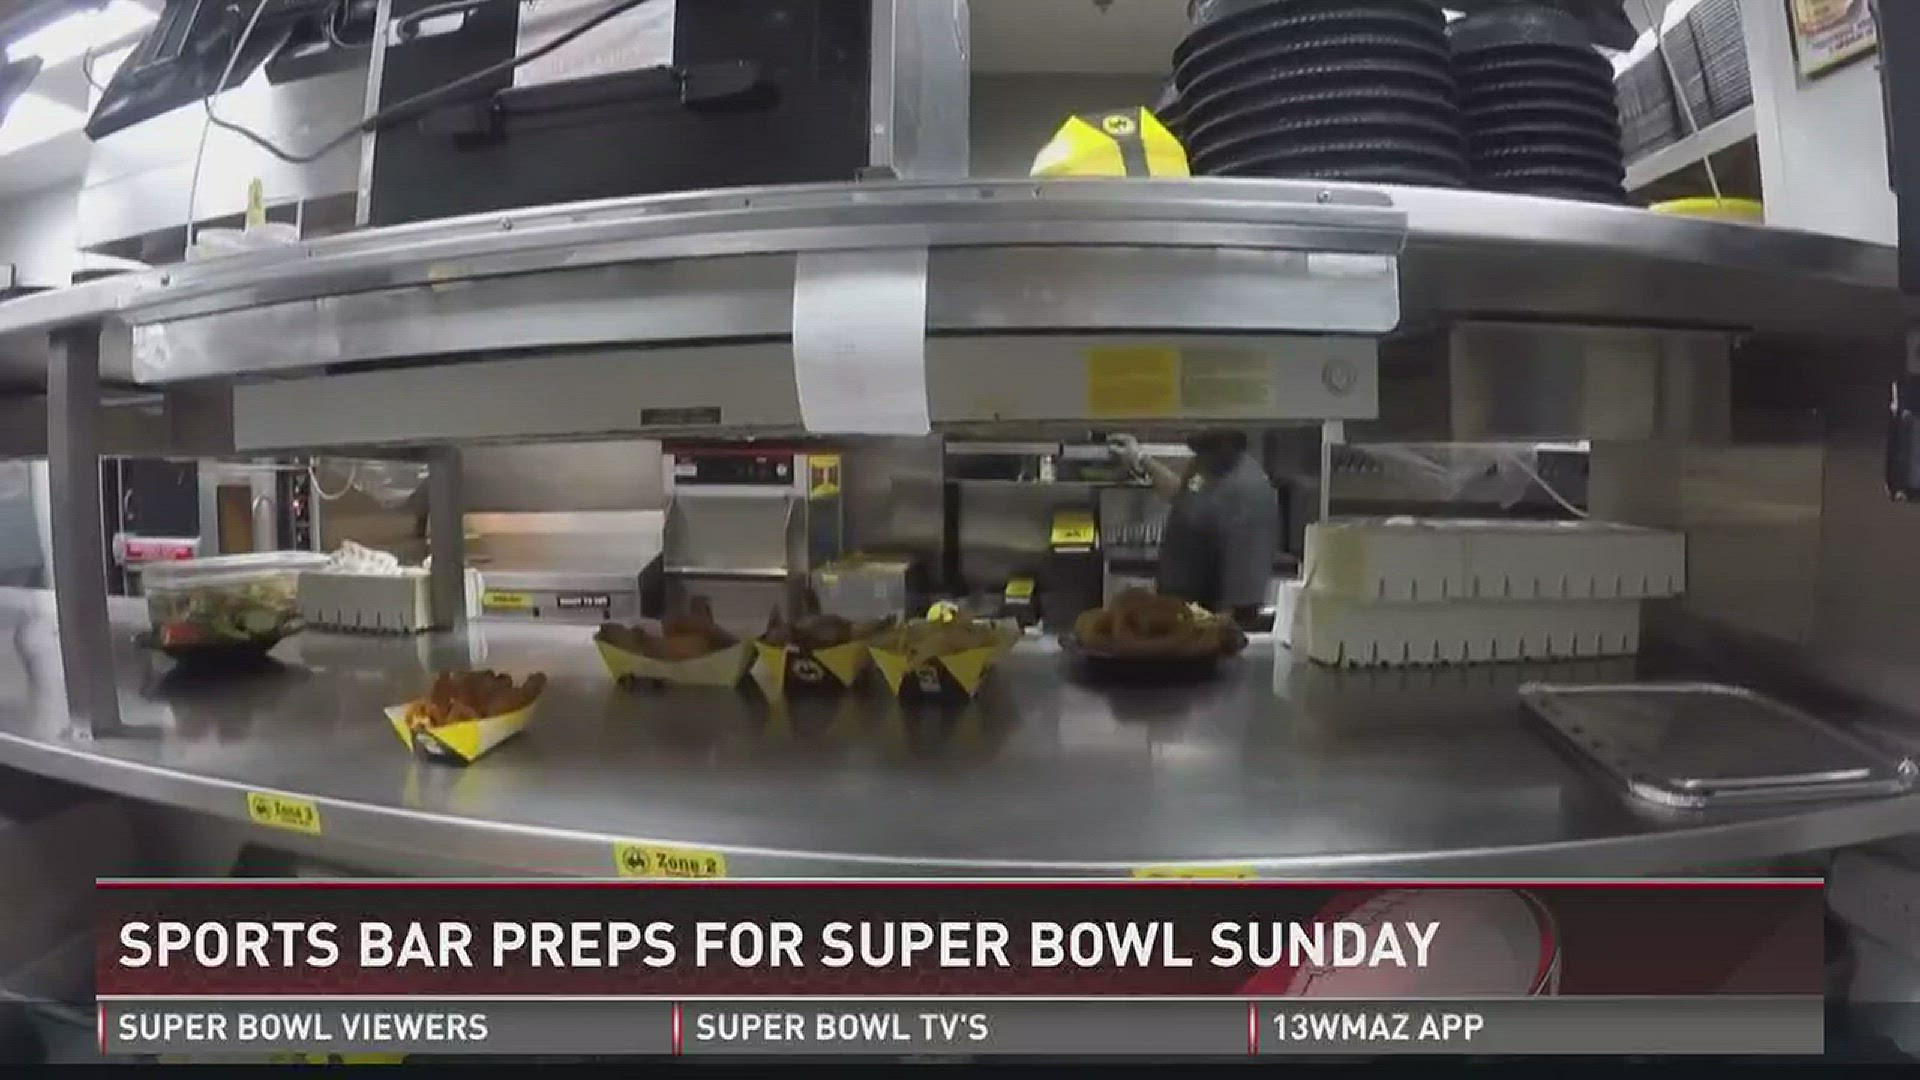 Breaking down the numbers for Super Bowl foods